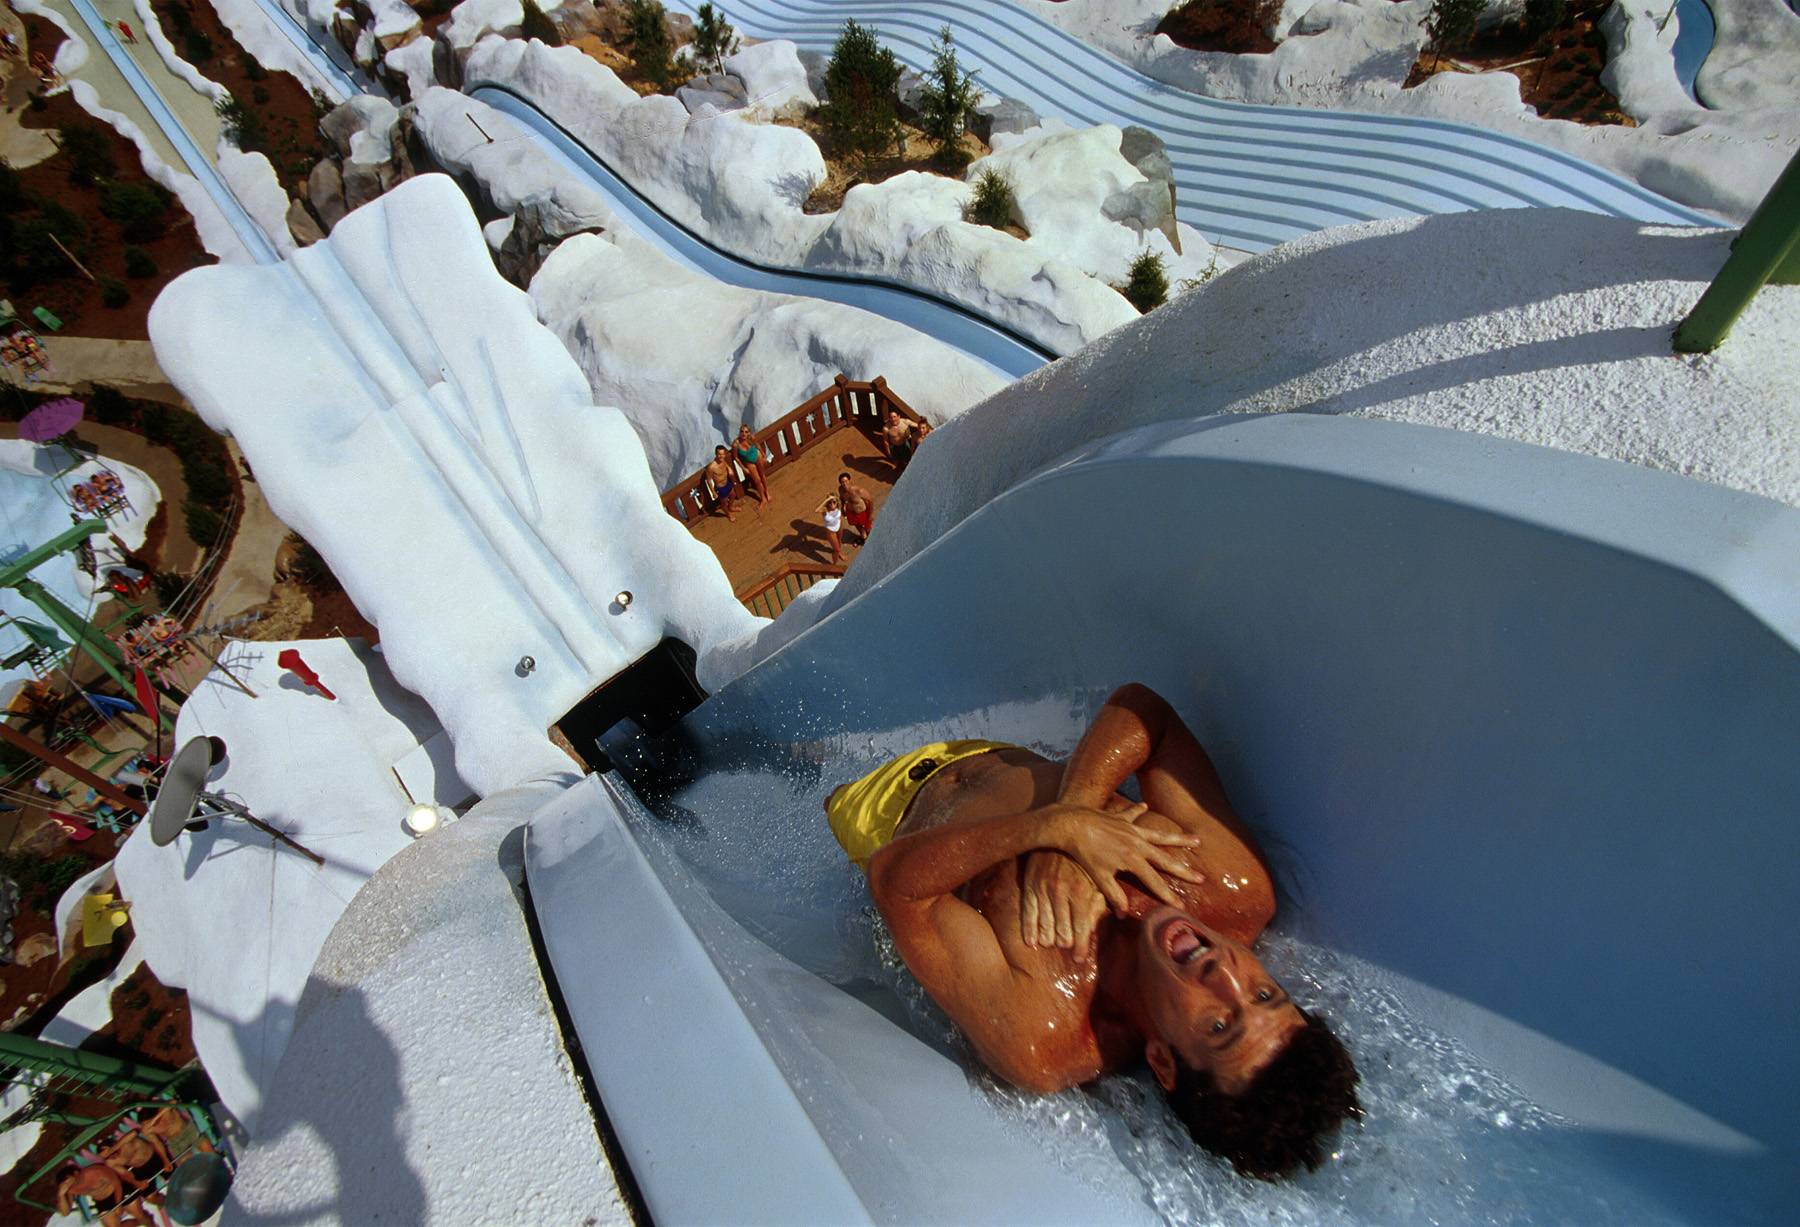 Blizzard Beach will have its last day of operation on March 16 before closing for refurbishment